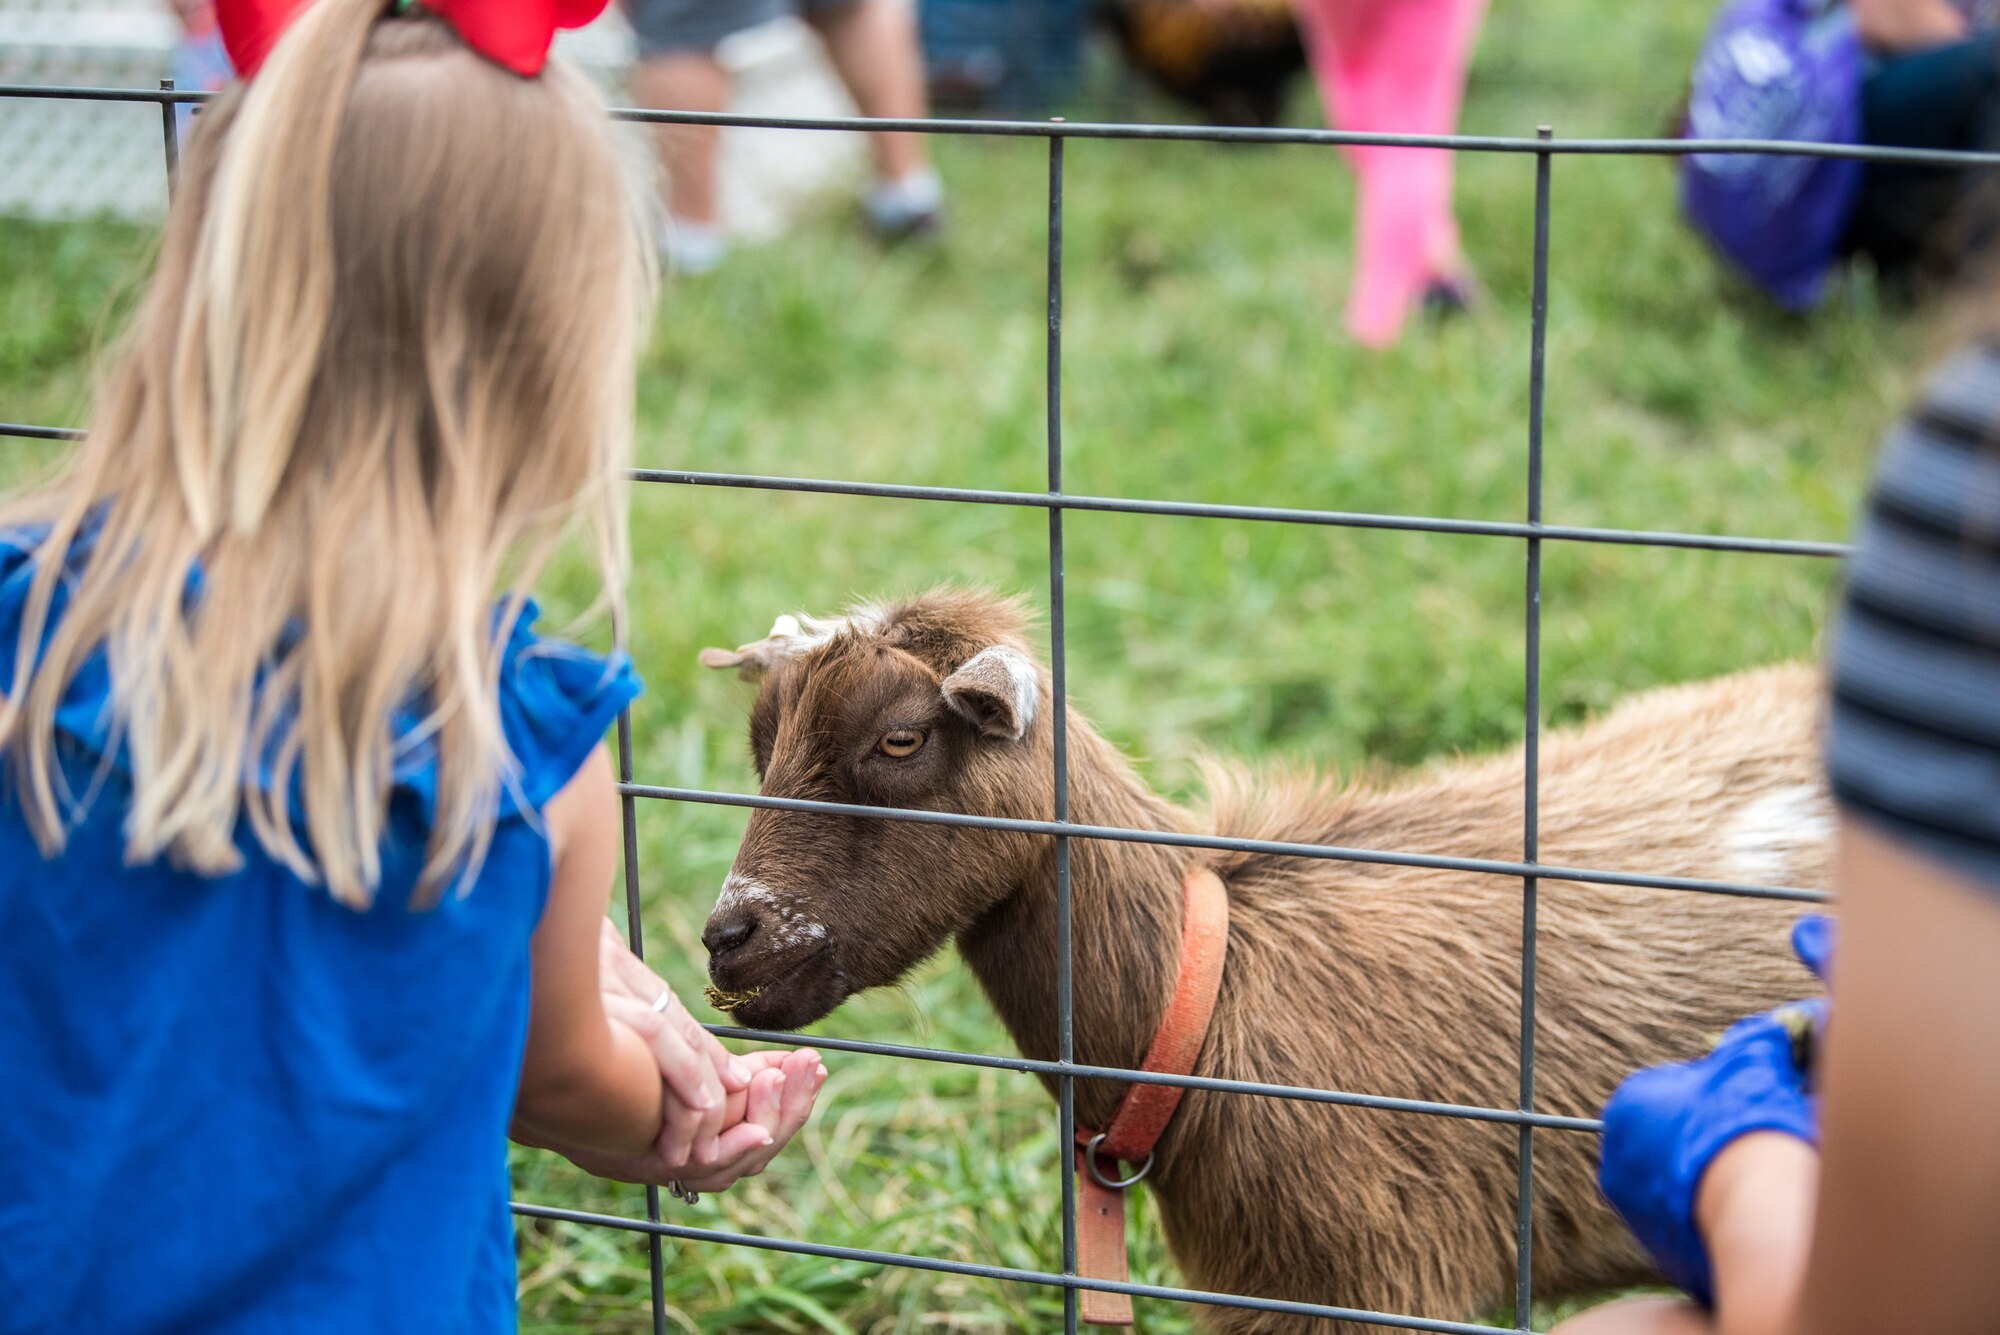 A child feeds a goat during Family Day at the Kentucky Air National Guard Base in Louisville, Ky., Sept. 16, 2018. The event featured lunch, games, a car show and a C-130 Hercules aircraft static display. (U.S. Air National Guard photo by Master Sgt. Phil Speck)